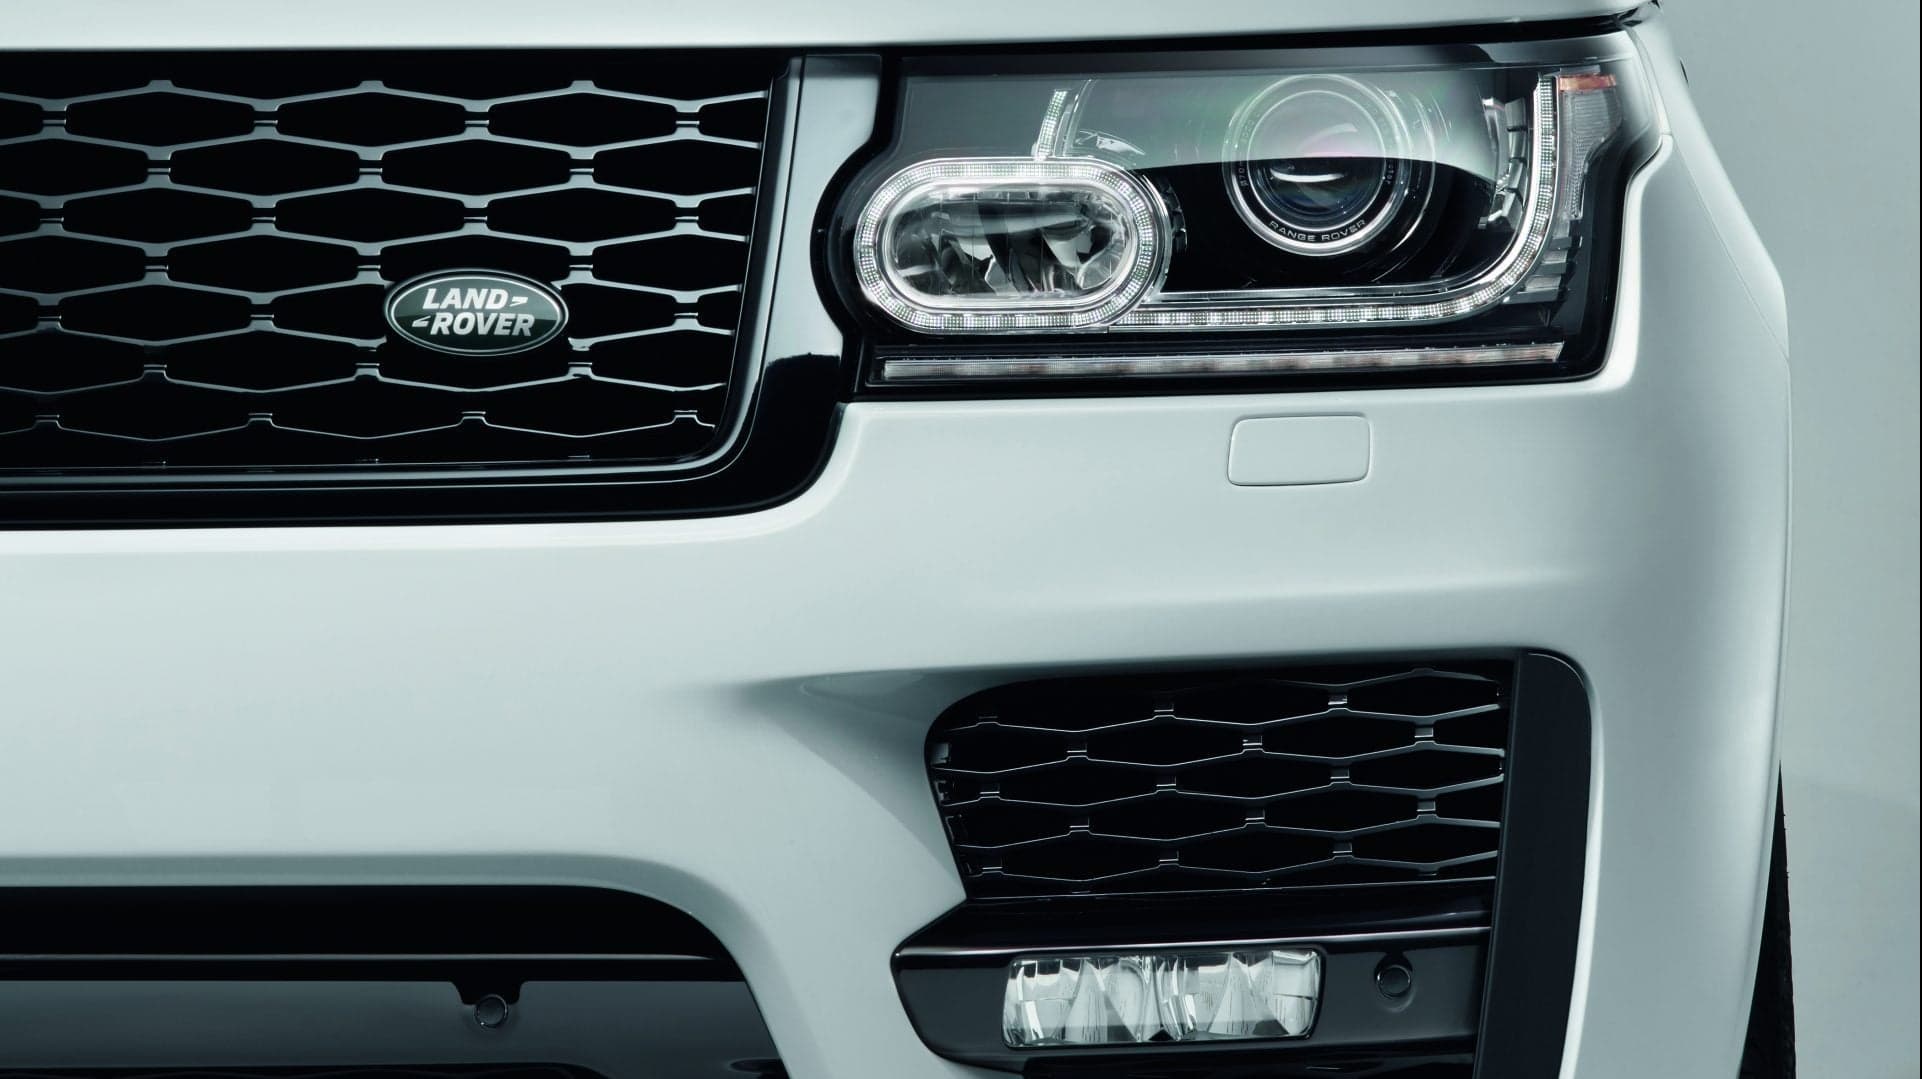 Land Rover Is Considering a New Halo Model to Take on the Bentley Bentayga